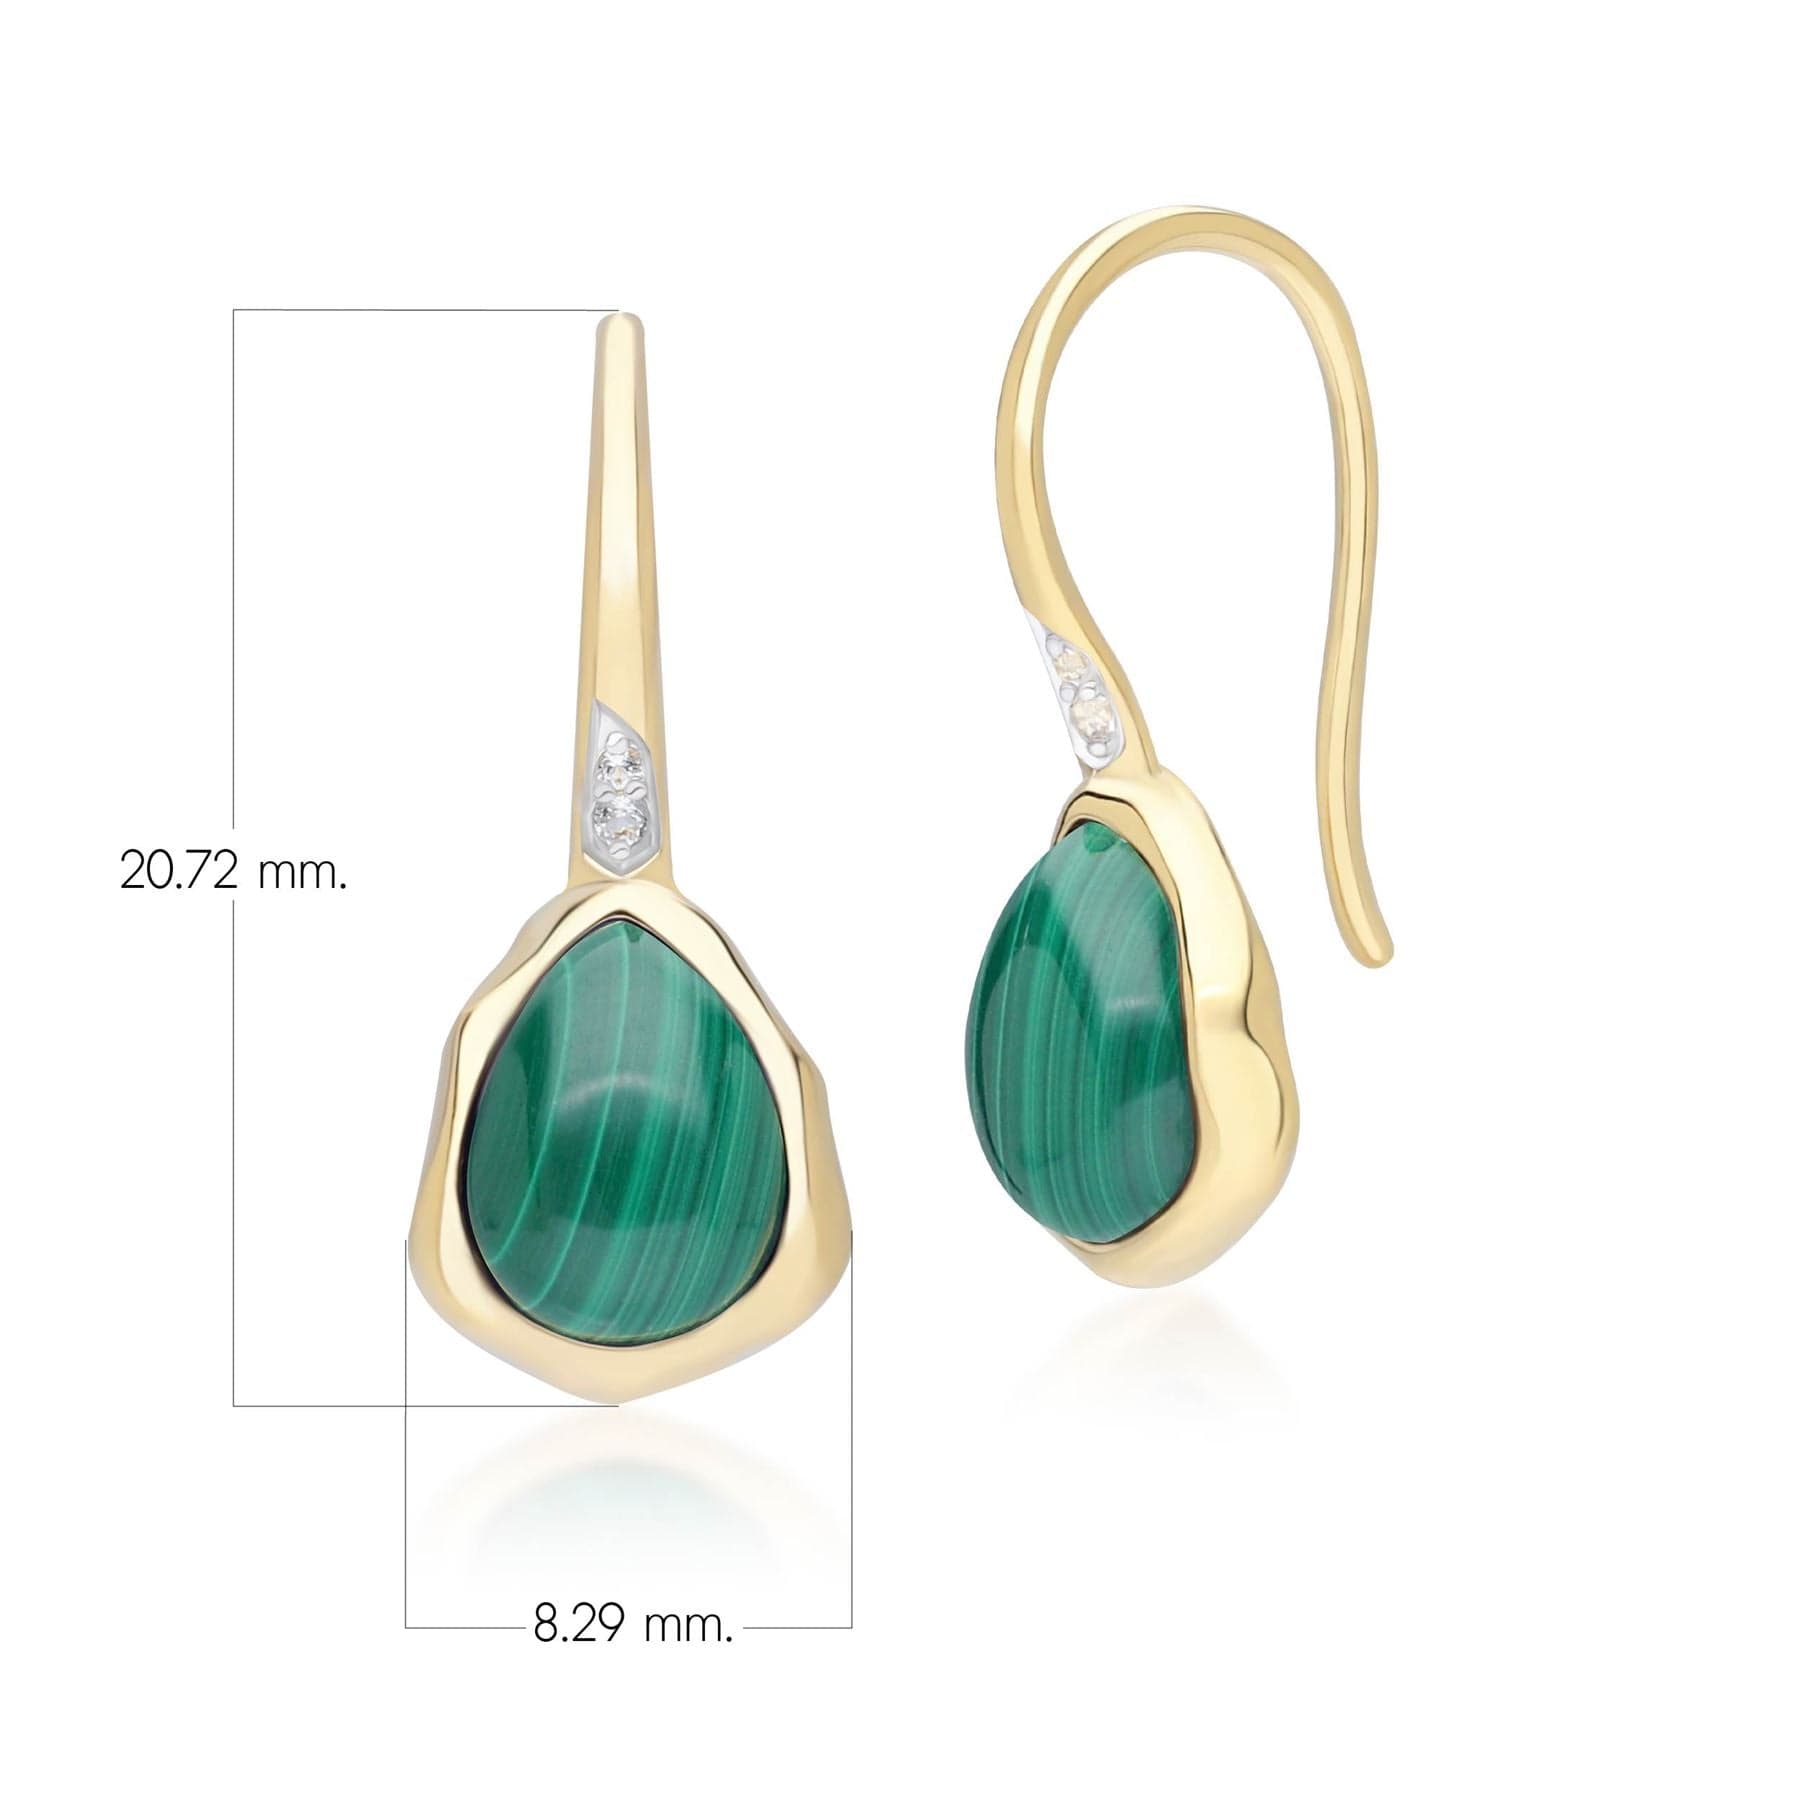 253E418701925 Irregular Malachite & Topaz  Drop Earrings In 18ct Gold Plated SterlIng Silver Dimensions